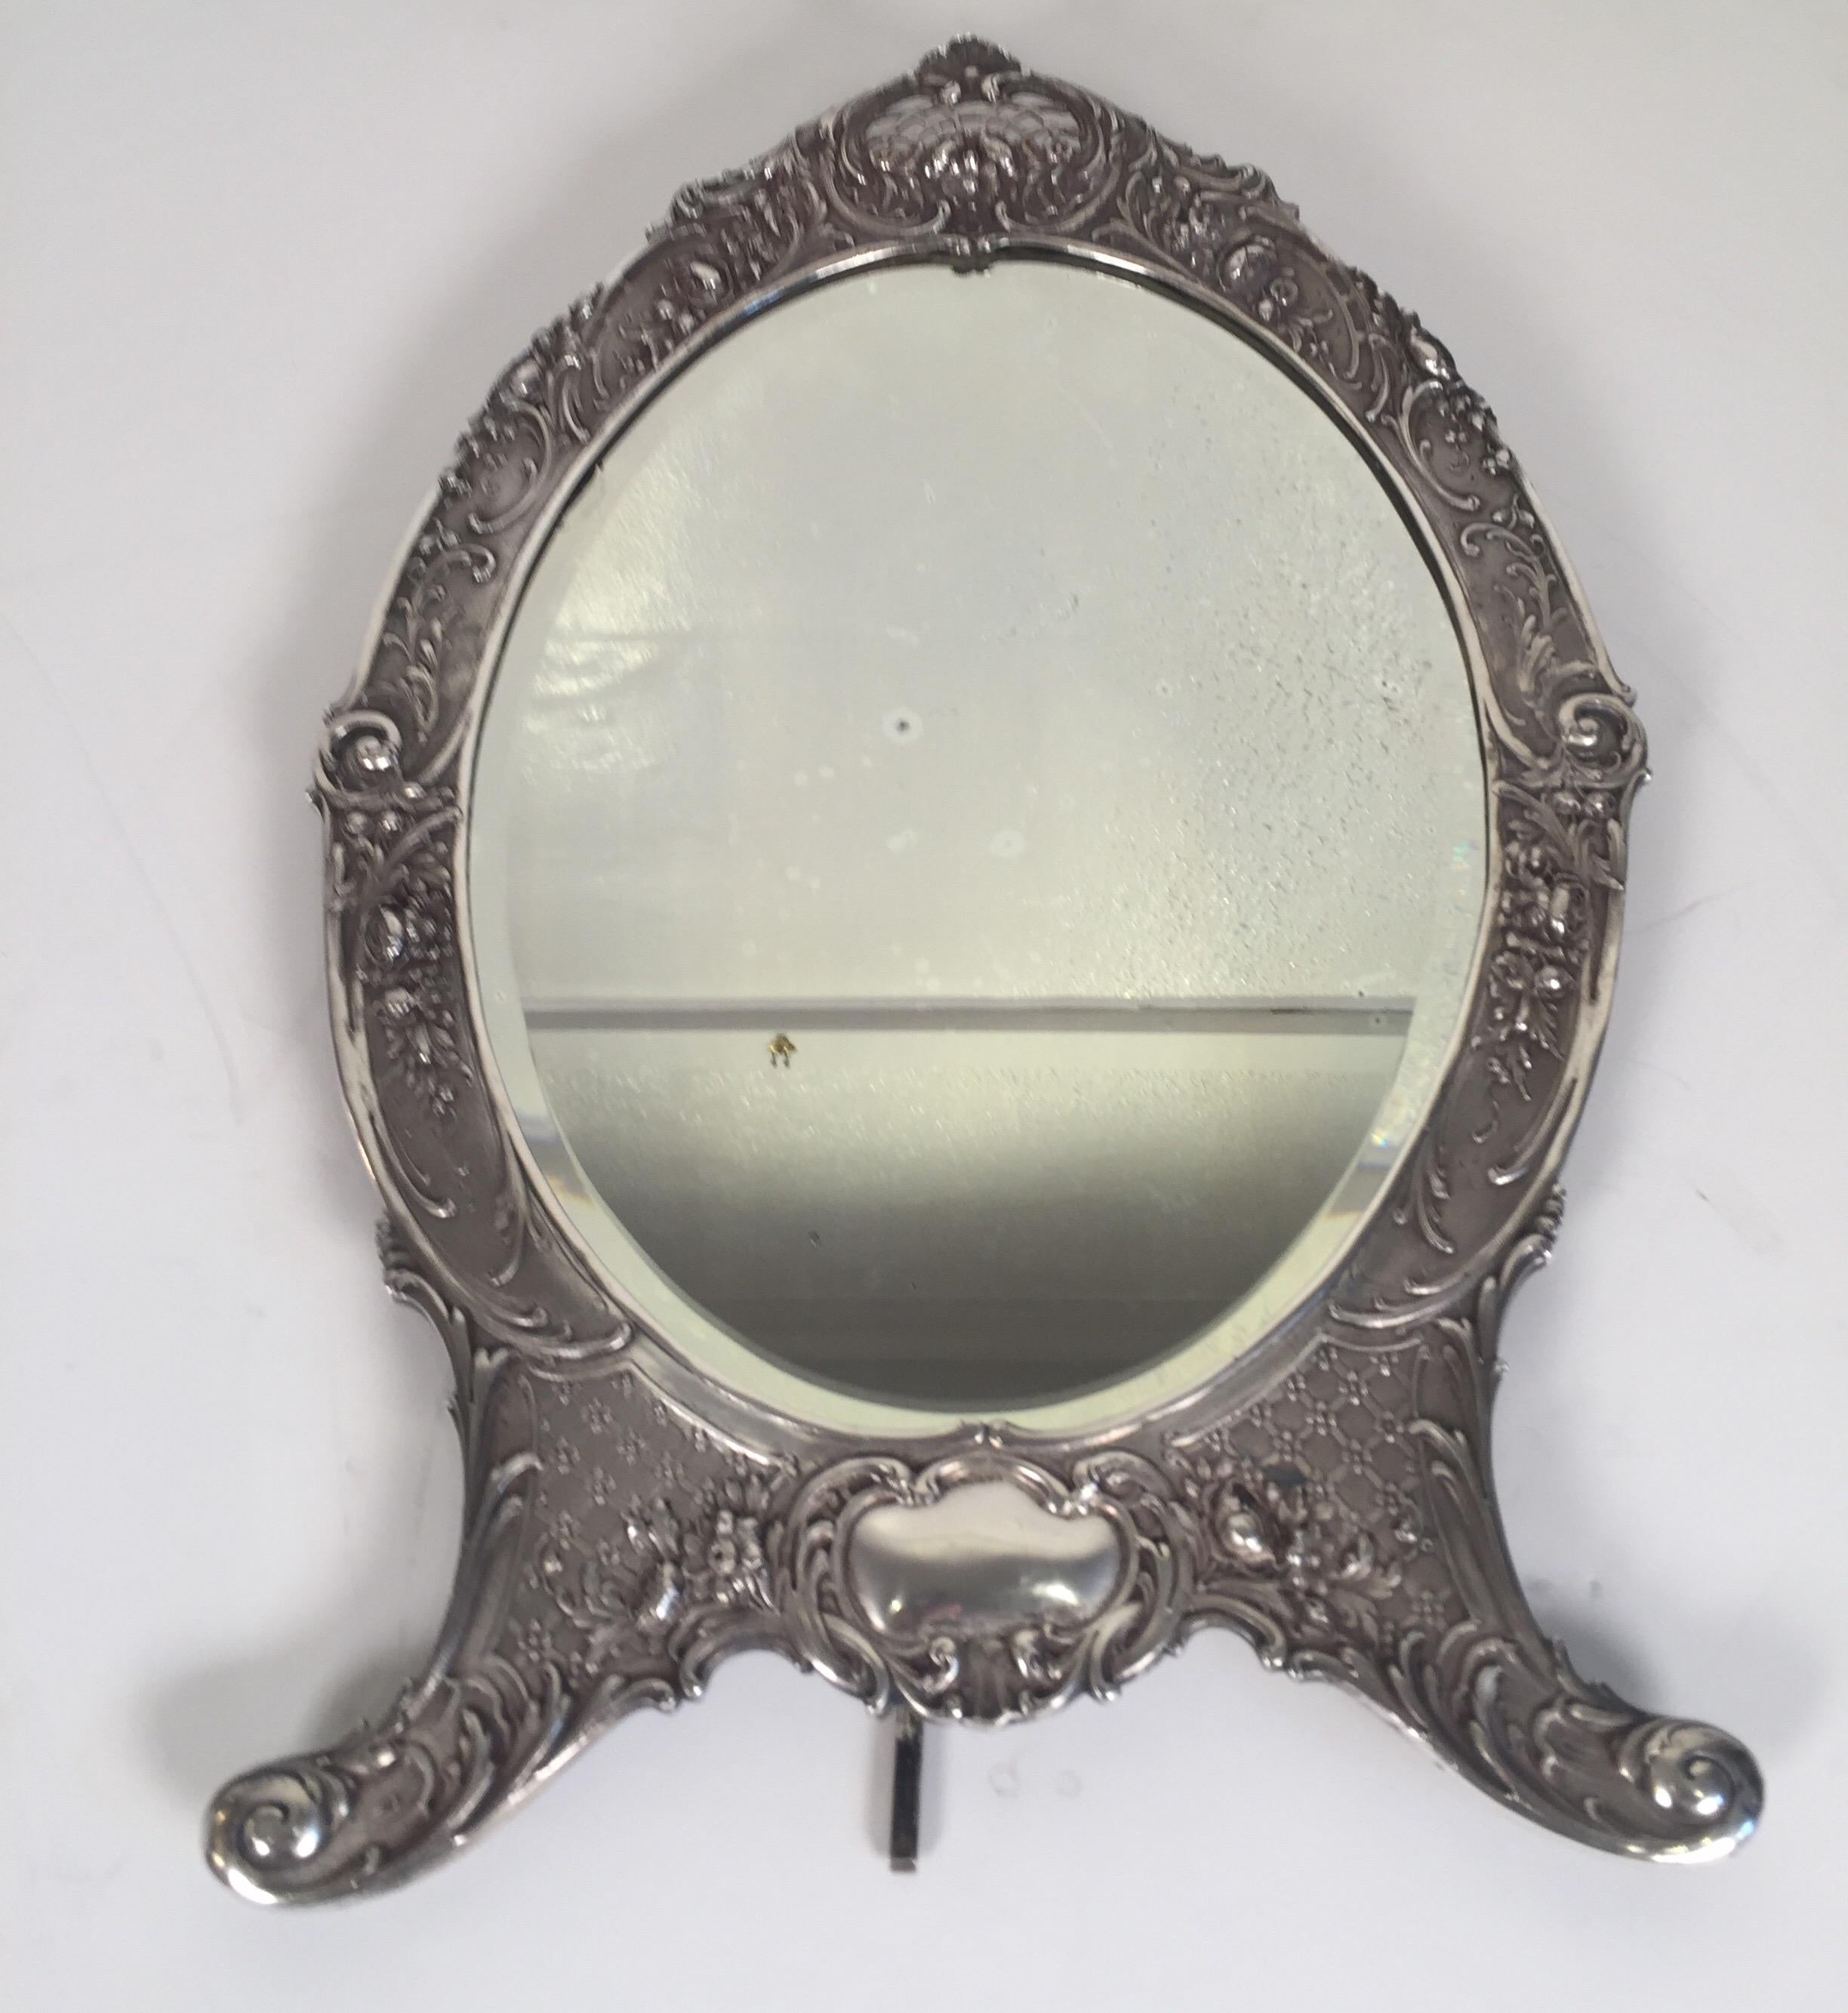 Sterling silver vanity mirror. Made by Tiffany in New York, circa 1900. The oval form with floral and scroll motif all-over the frame, the hand beveled oval glass is original. The back with original velvet backing. Marked on the frame with Tiffany